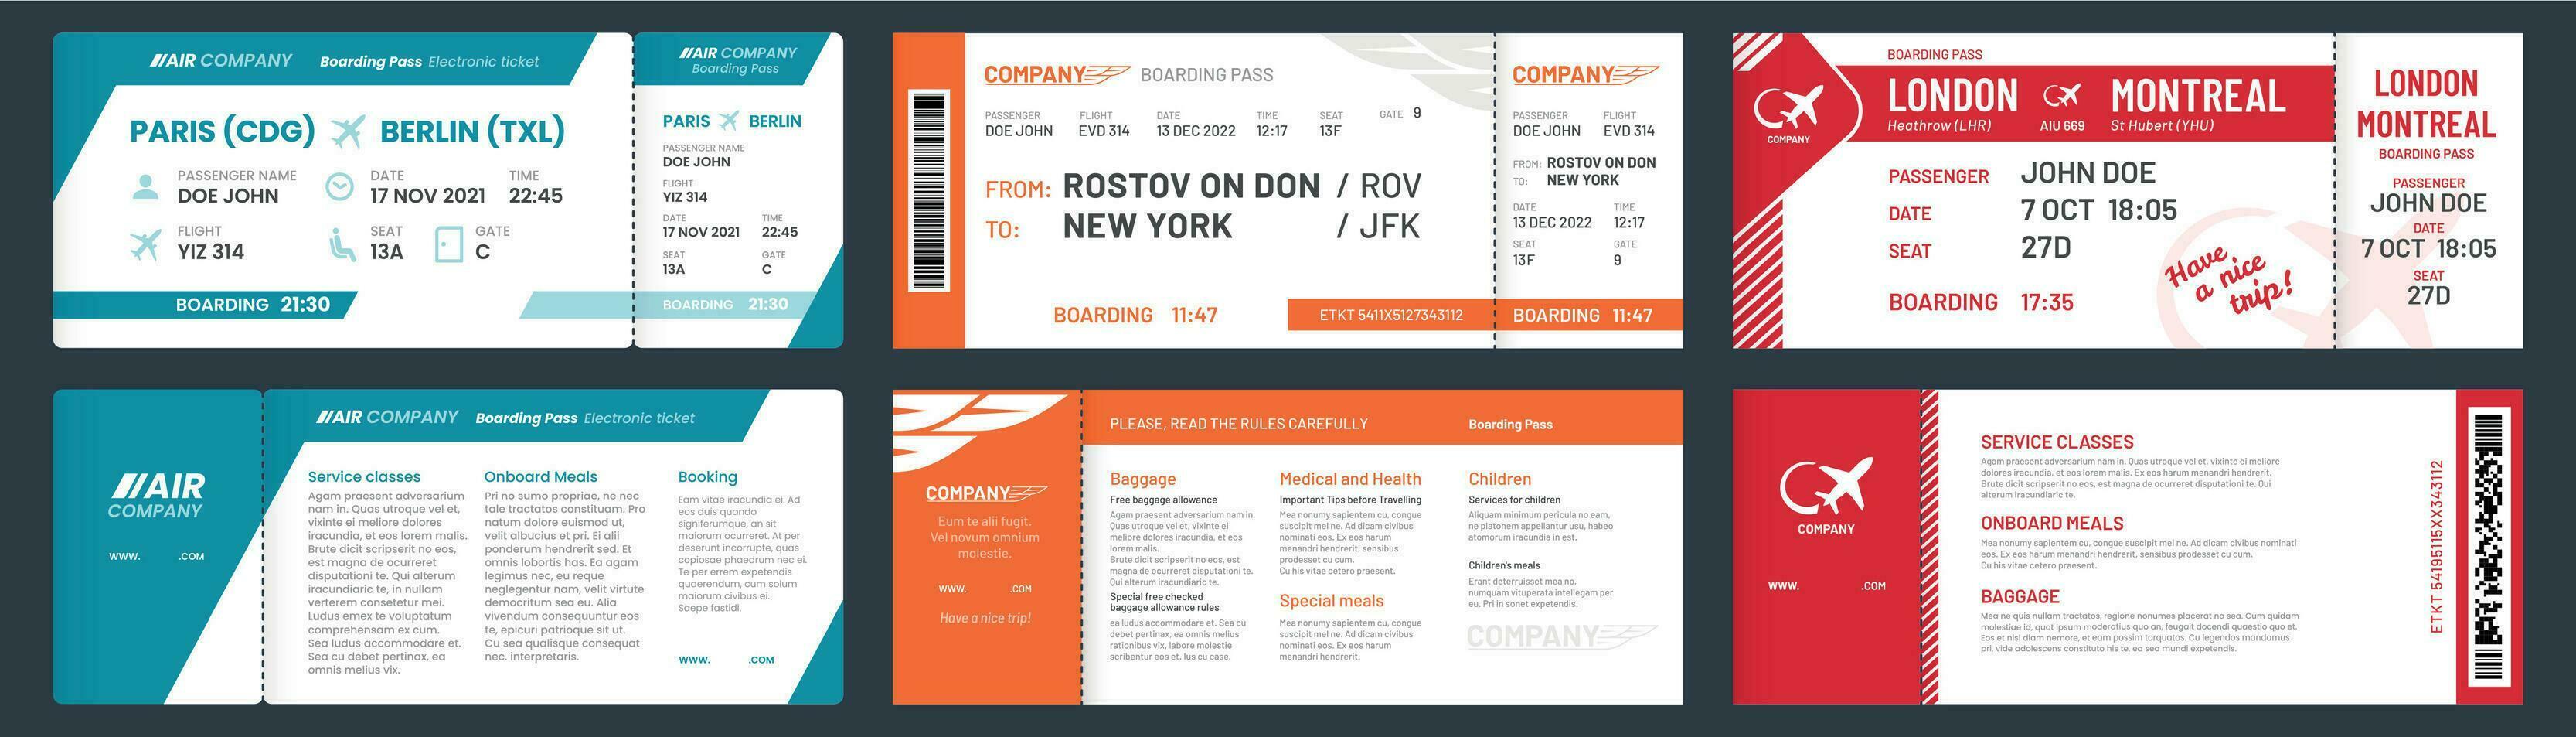 Airplane tickets. Airline ticket template with passenger name, aircraft trip flying tickets vector illustration set